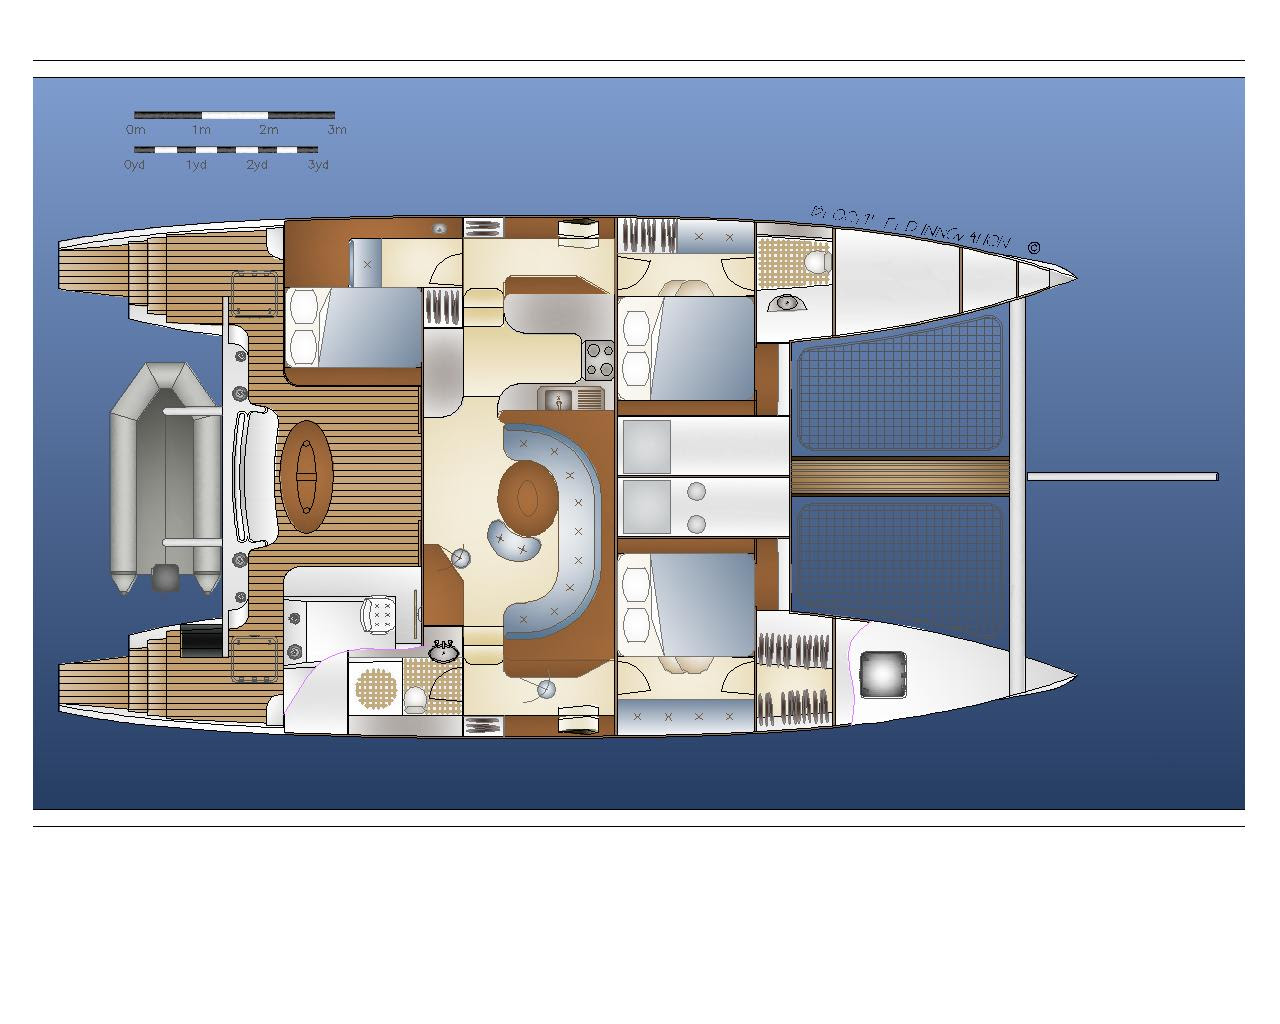 Don’t Spend Your Money on Catamaran Boat Plans | toxovybys